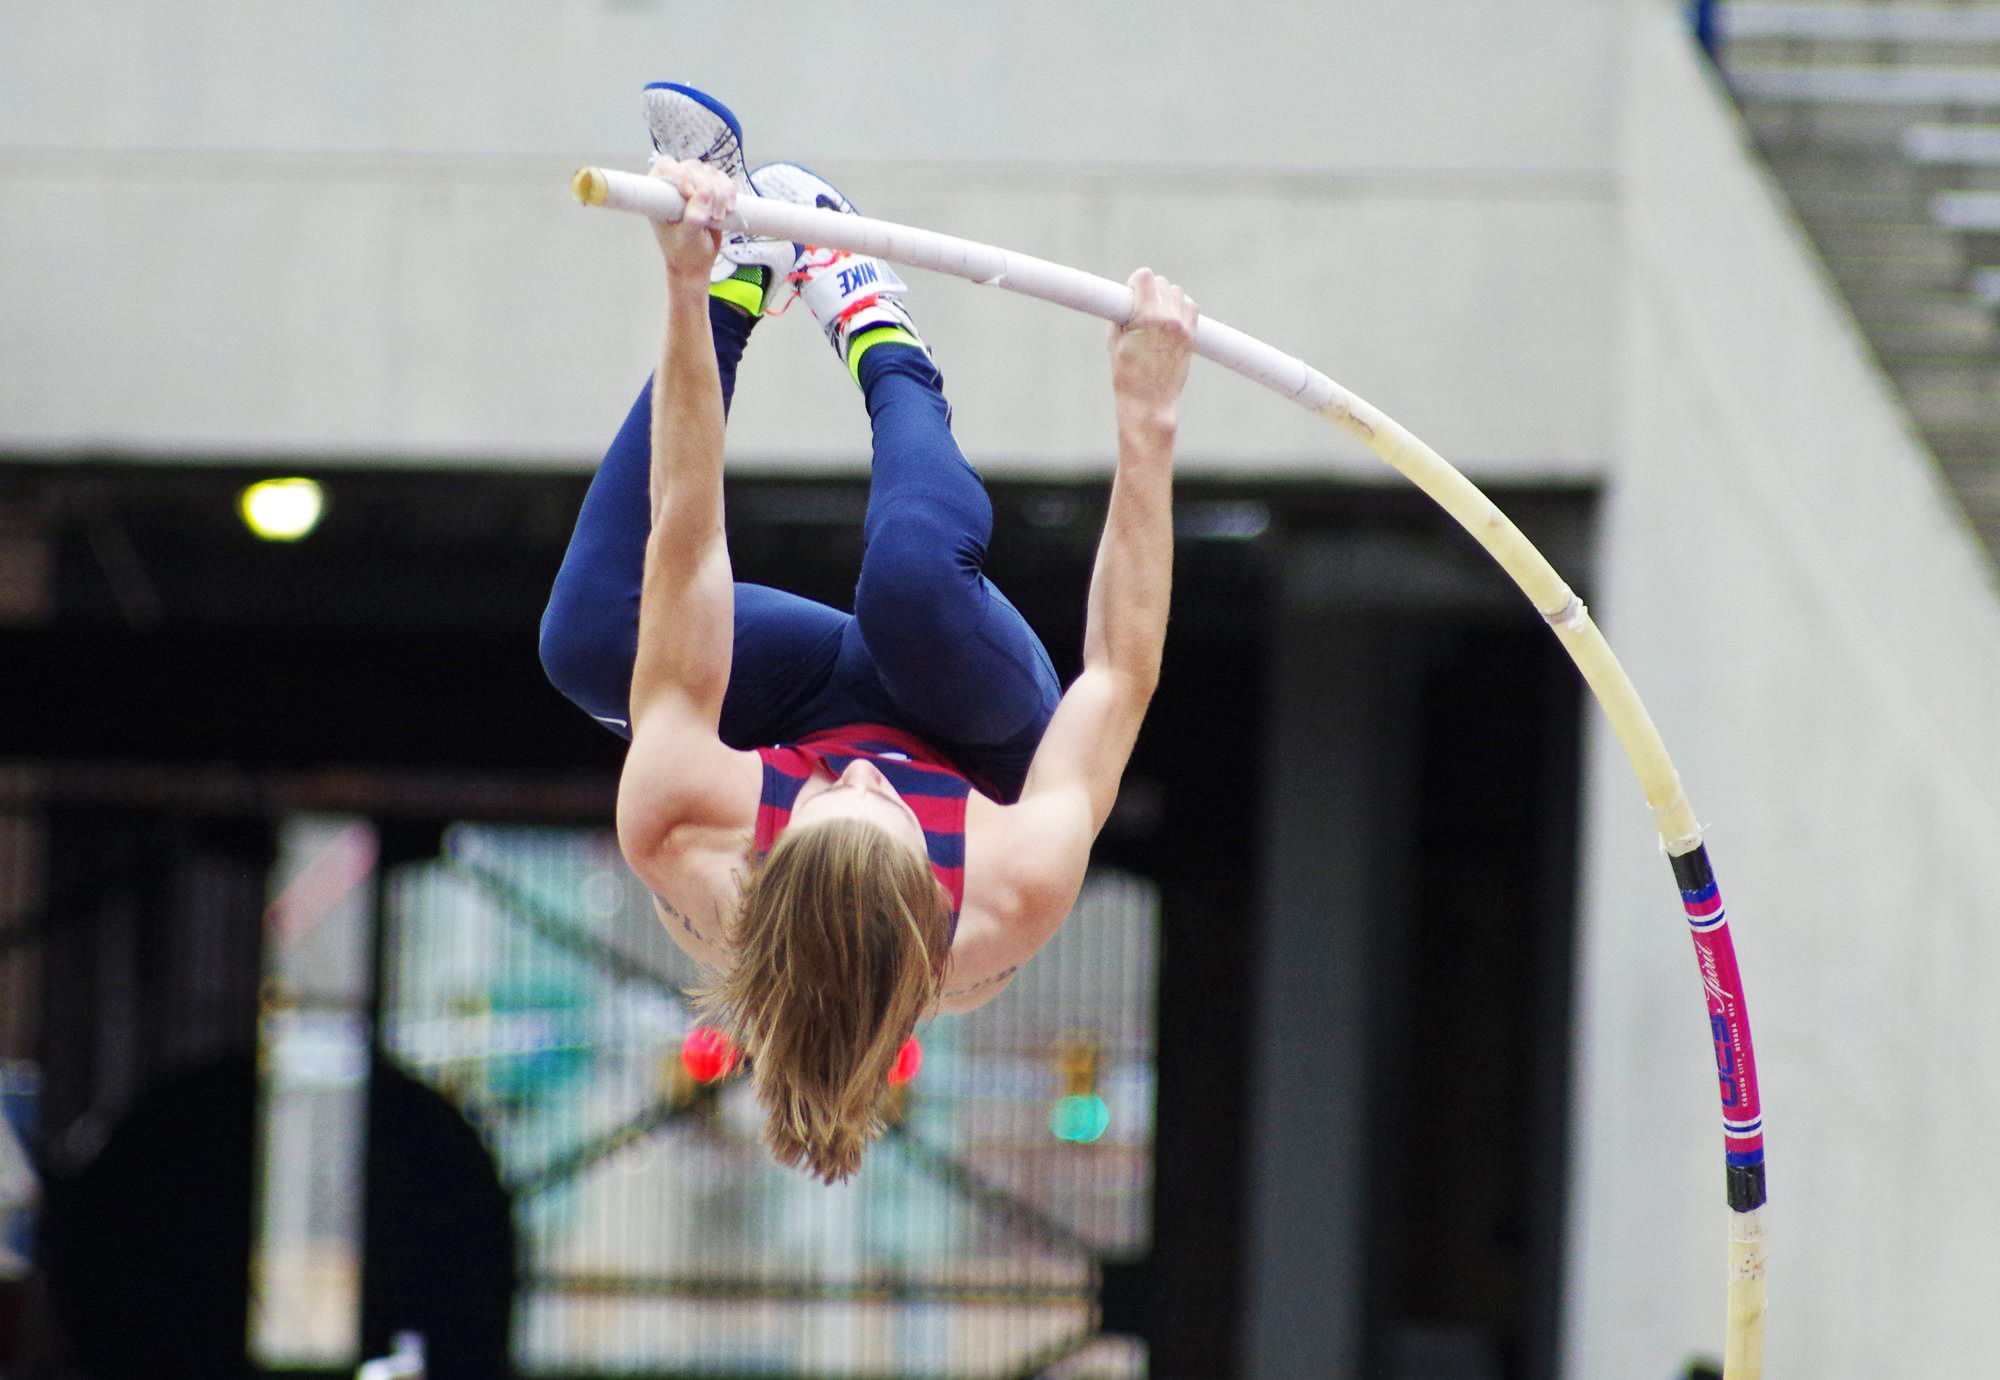 Sean Clare of the Penn Track and Field team performs the pole vault during a meet.